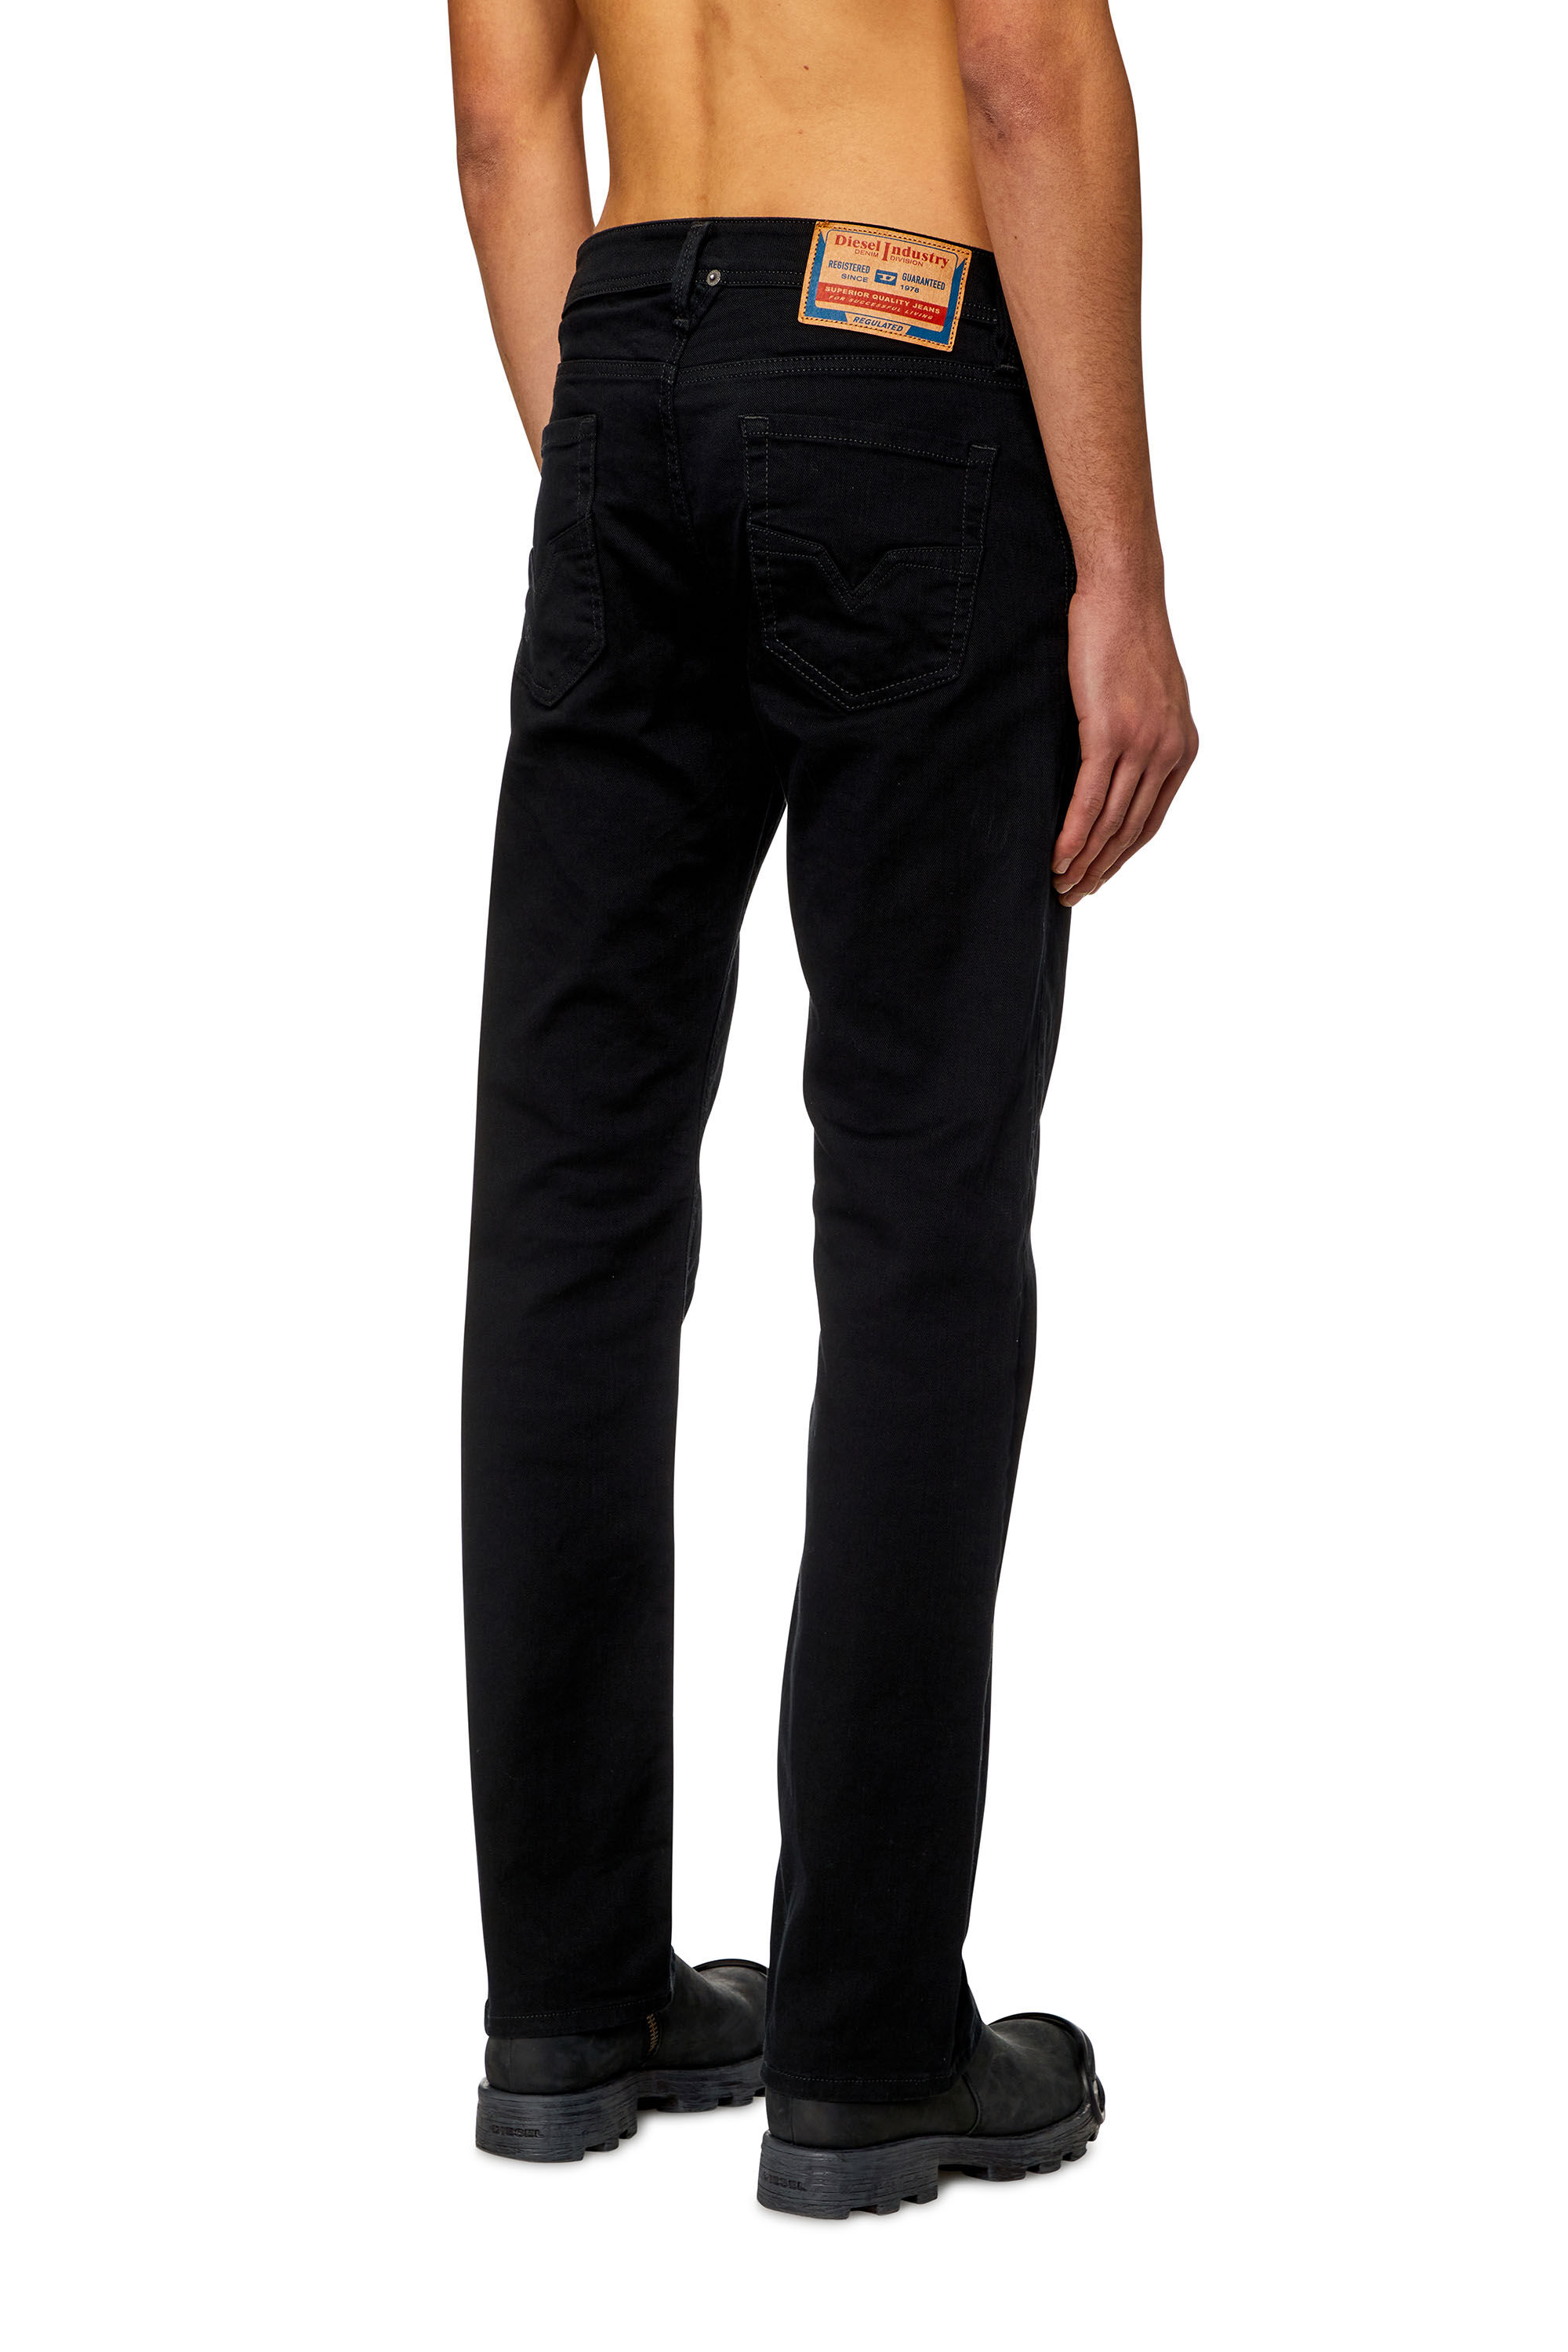 Diesel - Straight Jeans 1985 Larkee 0688H, Hombre Straight Jeans - 1985 Larkee in Negro - Image 4